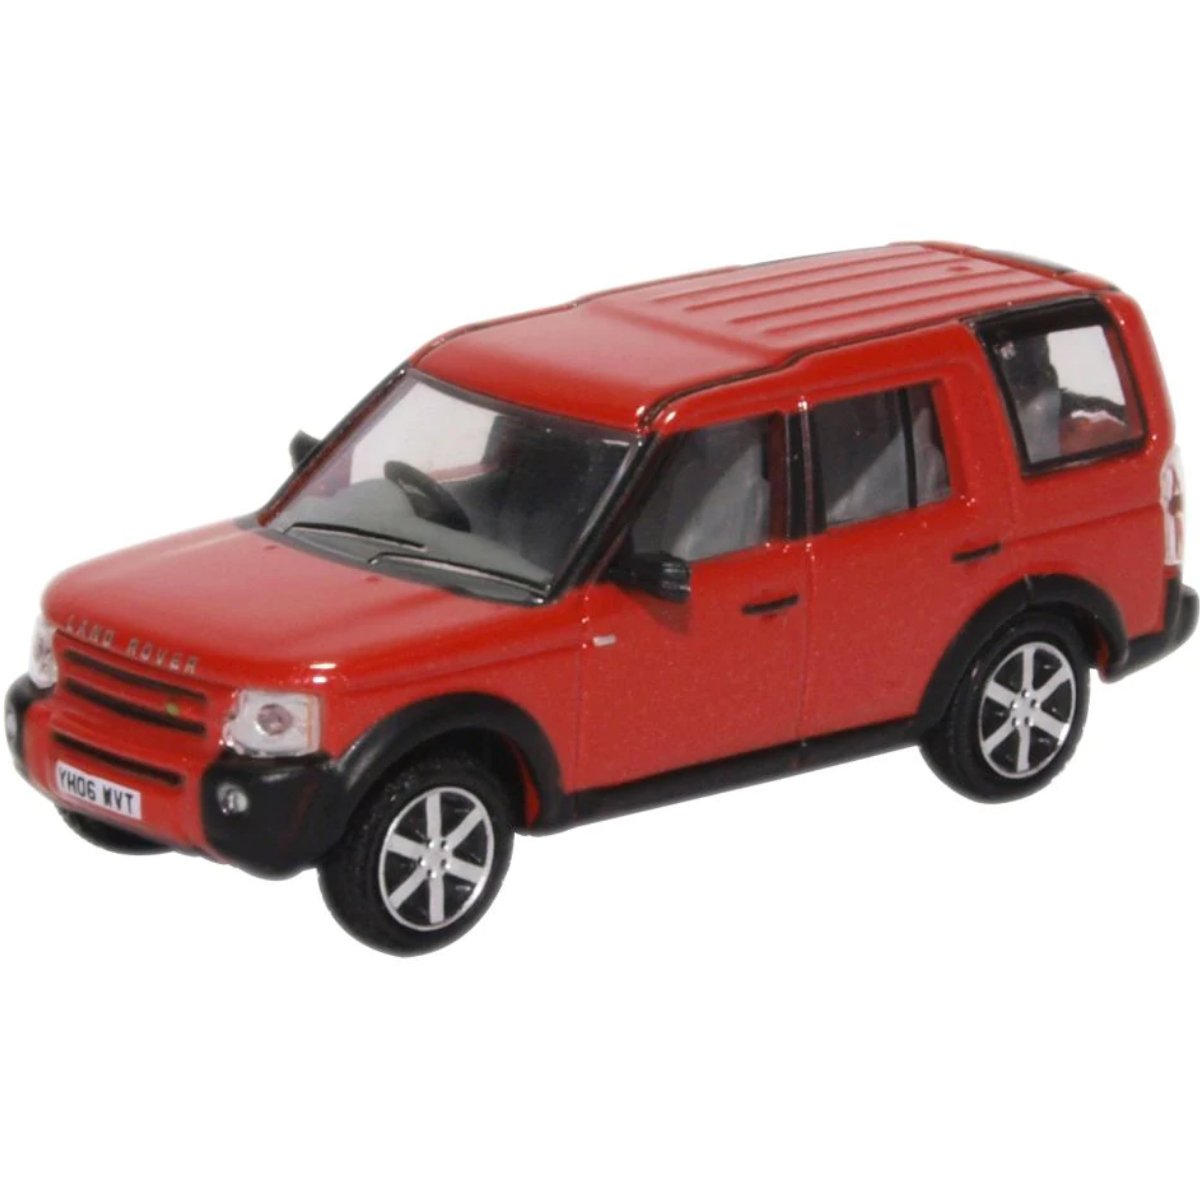 Oxford Diecast 76LRD008 Land Rover Discovery 3 Rimini Red Metallic - Phillips Hobbies